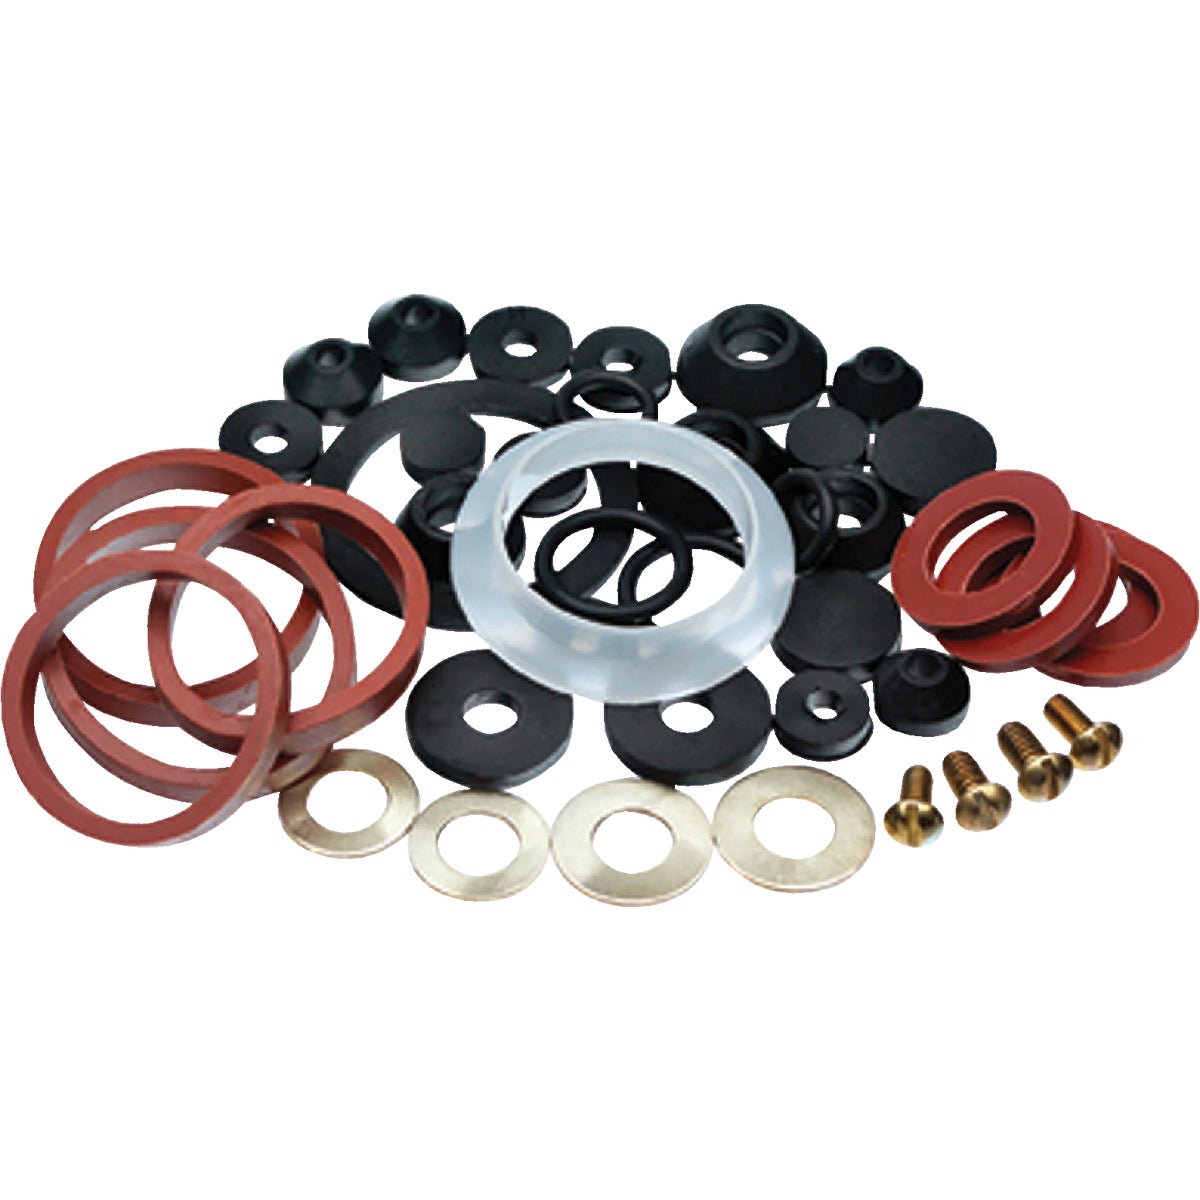 Item 453093, This home washer assortment contains: Faucet washers, hose washers, slip 